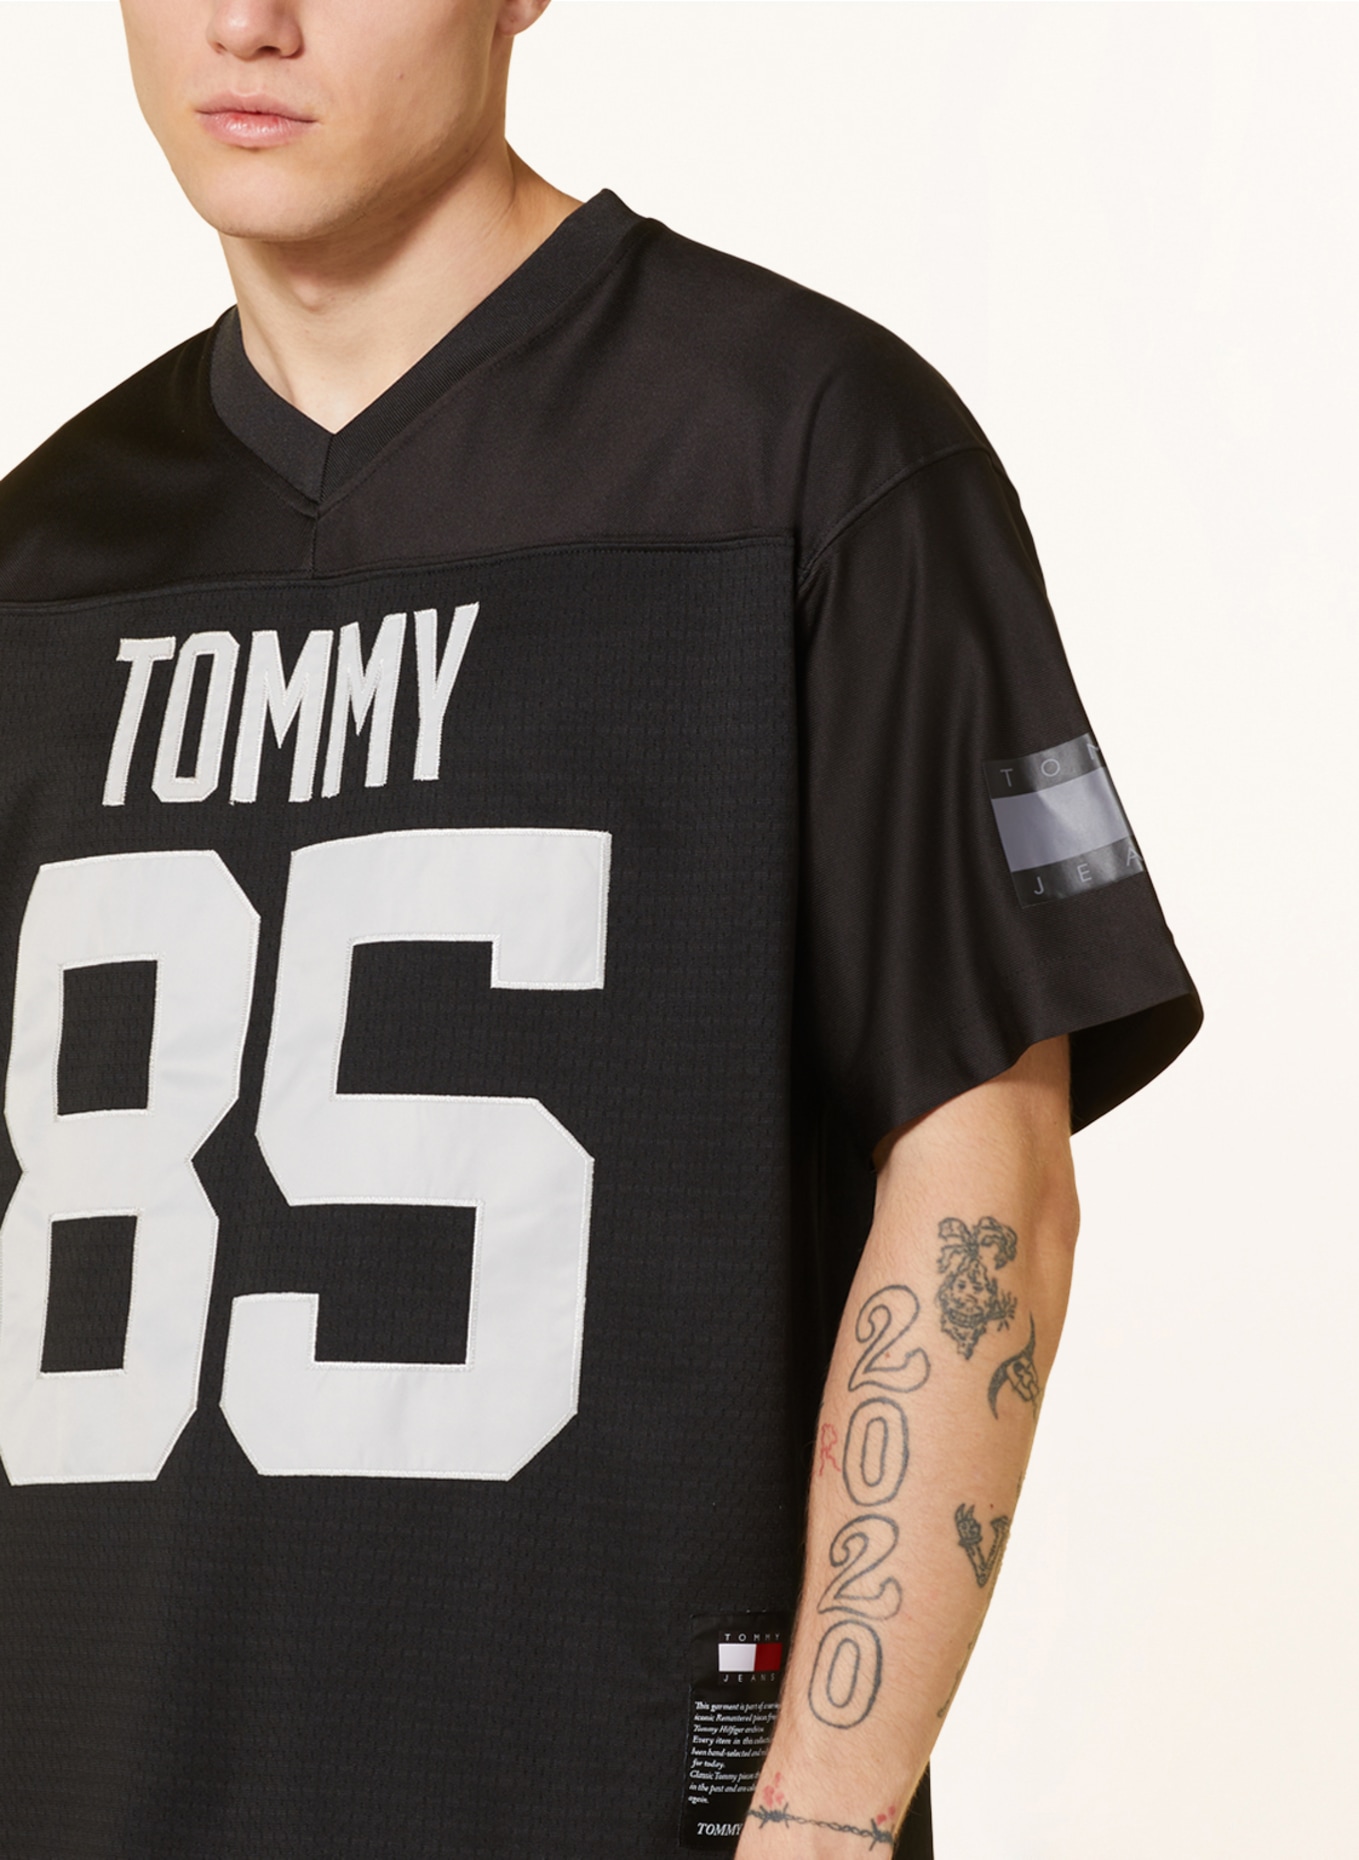 JEANS T-shirt made TOMMY gray in mesh of black/